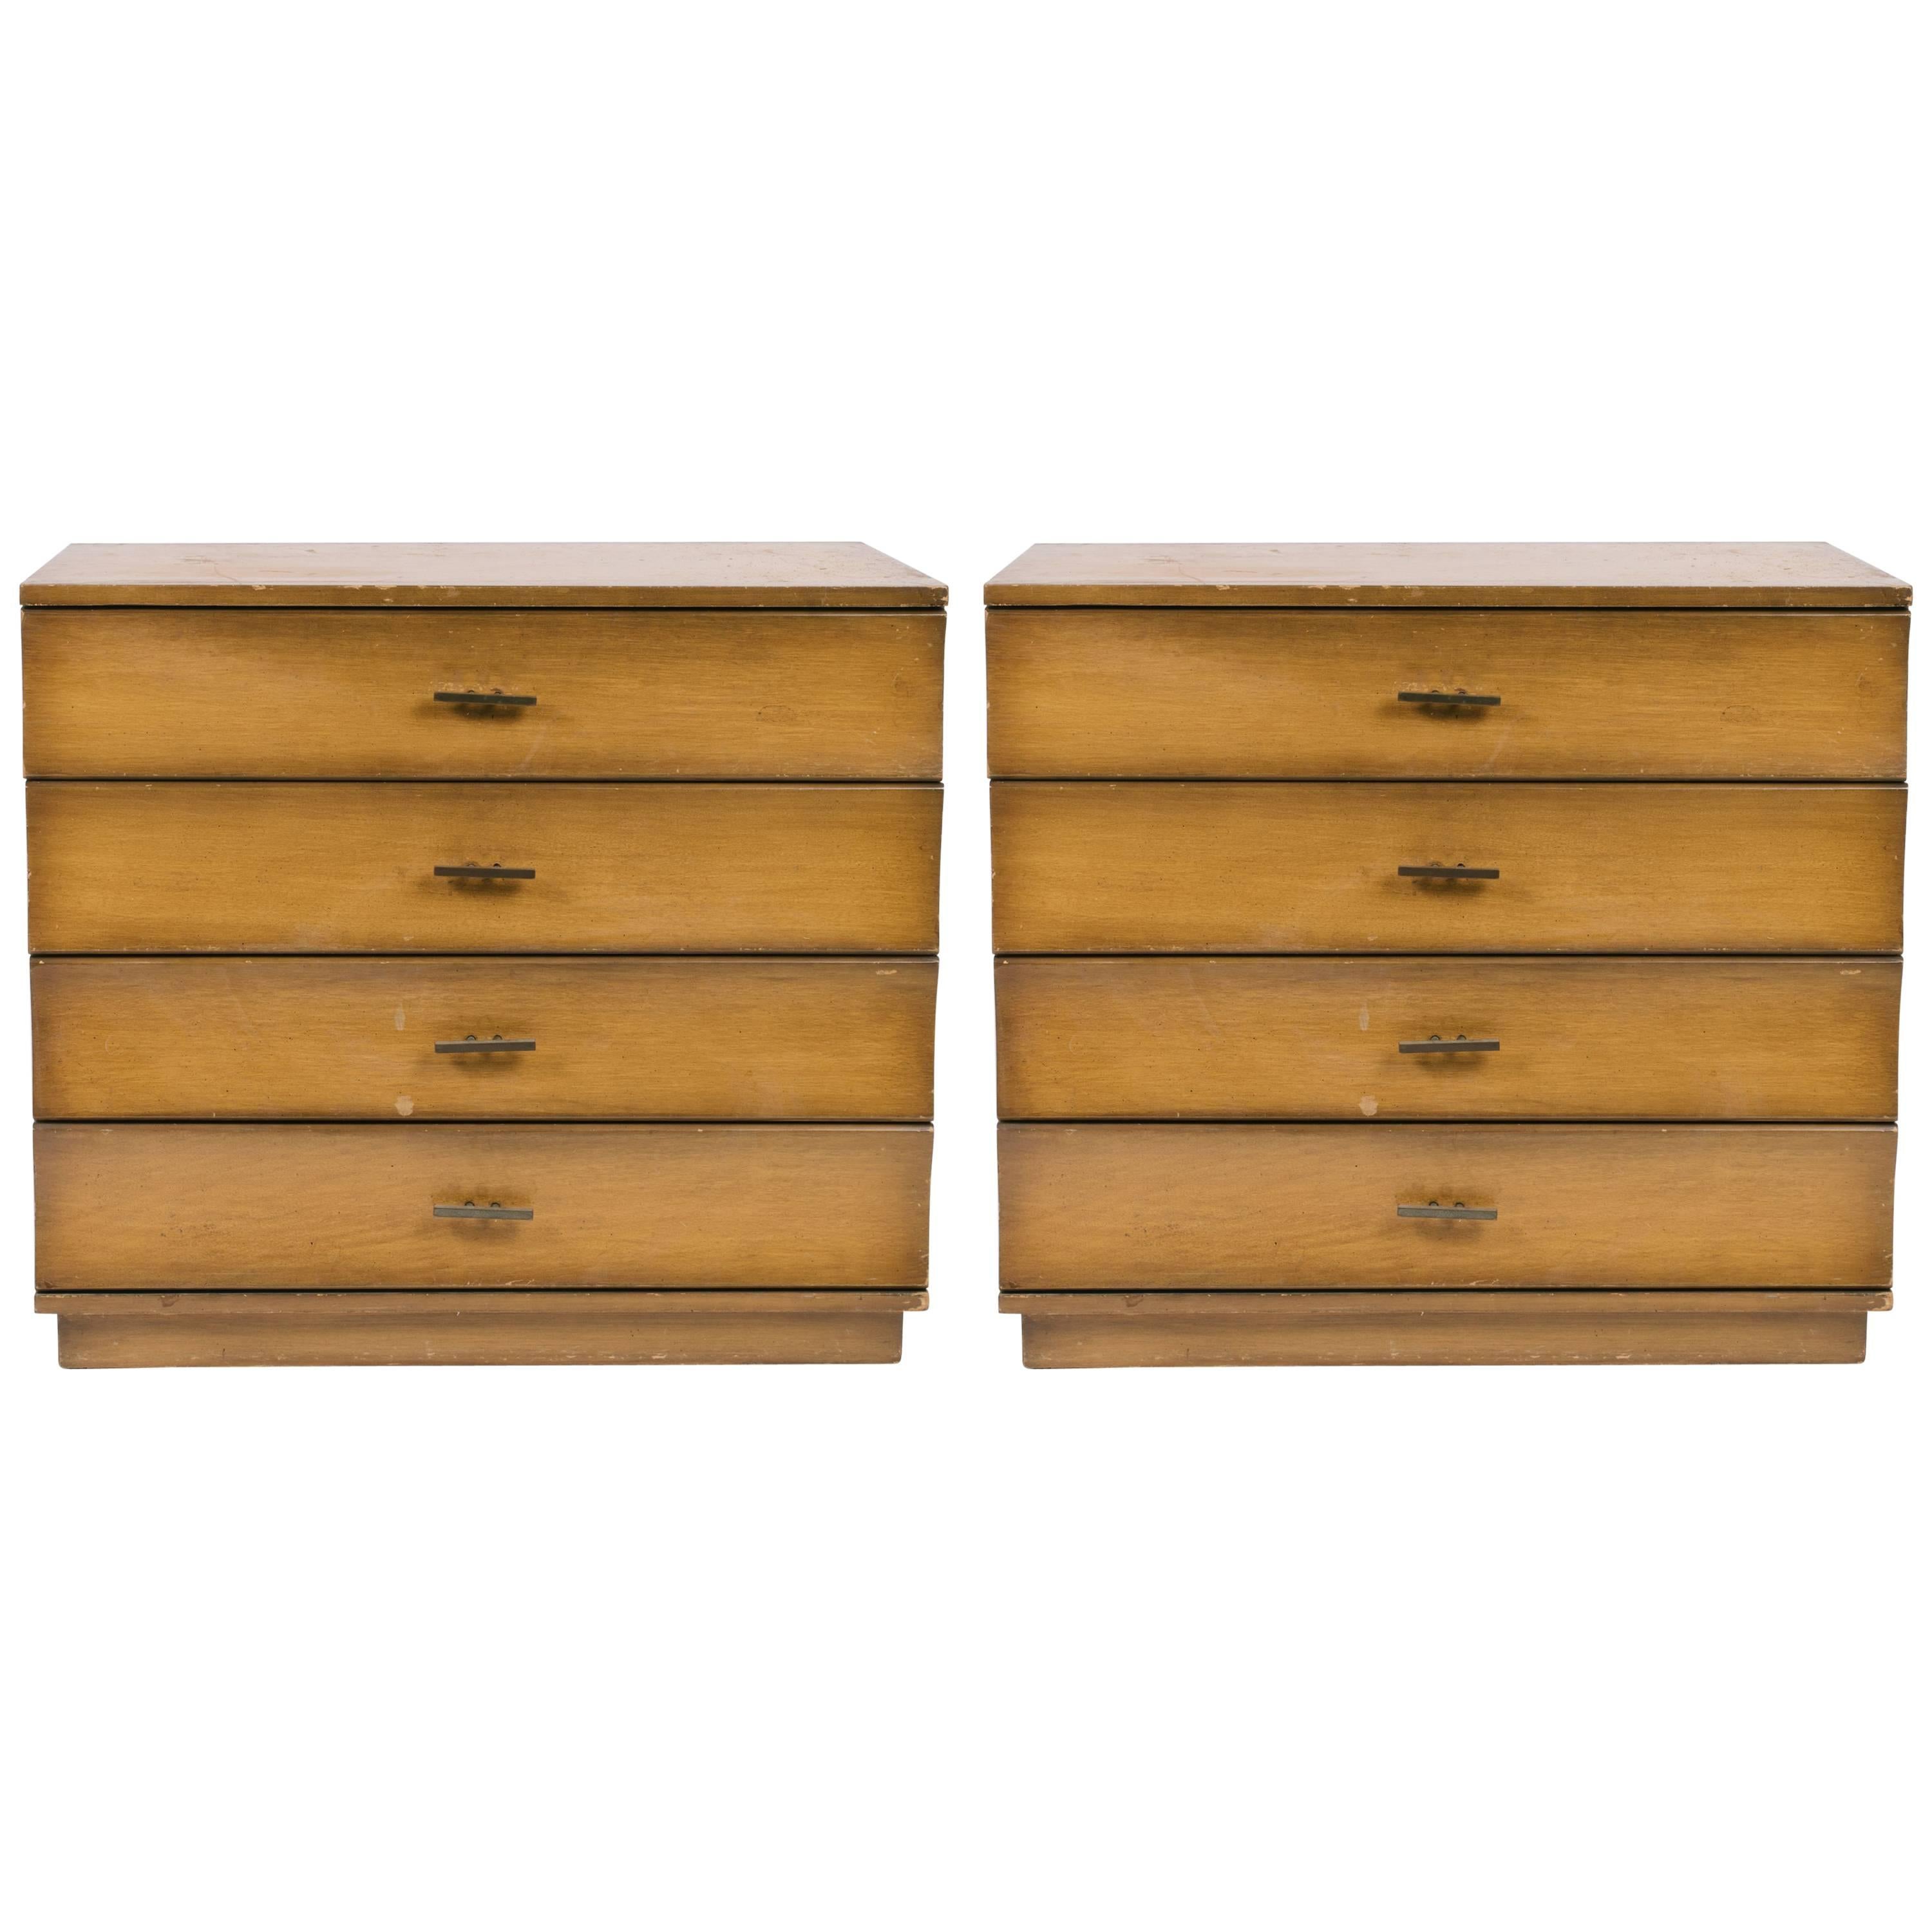 Pair of Midcentury Bachelor Chests